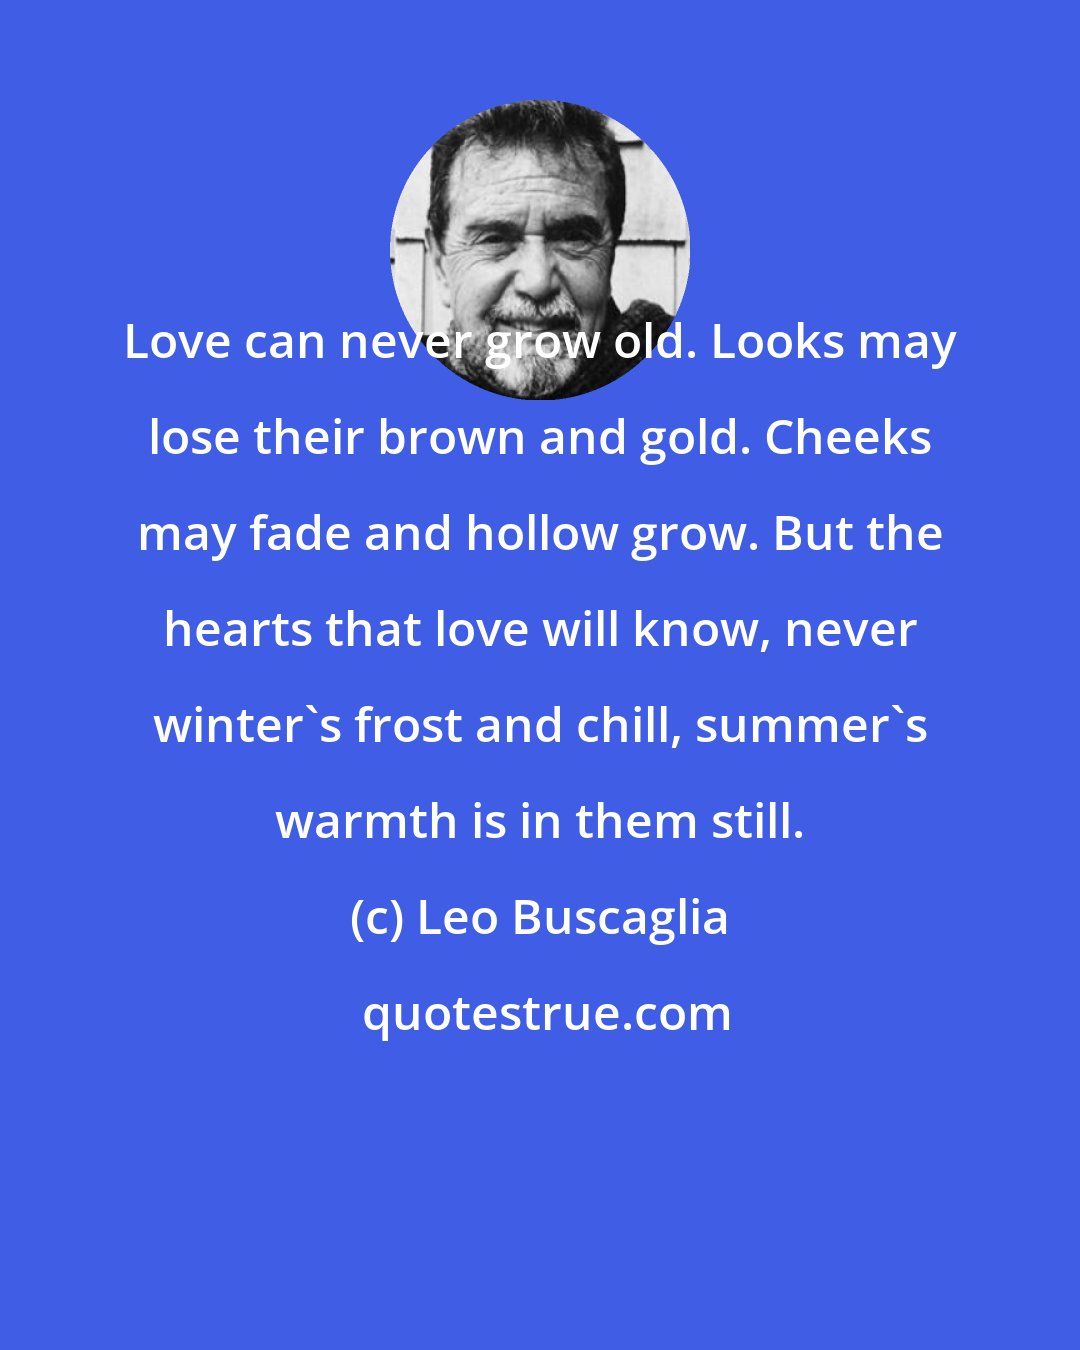 Leo Buscaglia: Love can never grow old. Looks may lose their brown and gold. Cheeks may fade and hollow grow. But the hearts that love will know, never winter's frost and chill, summer's warmth is in them still.